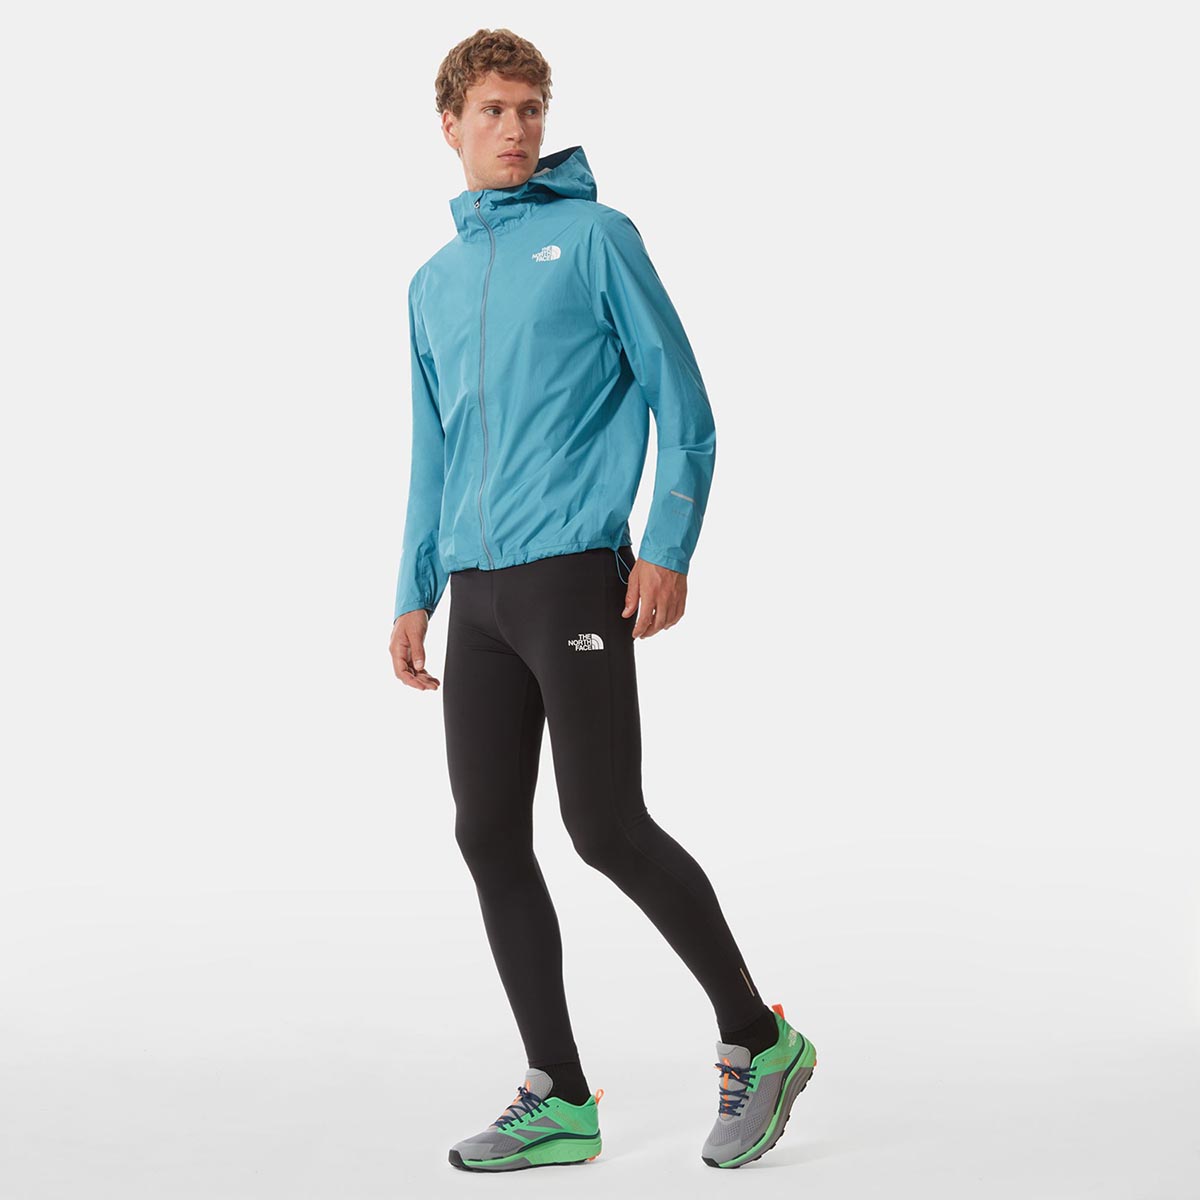 THE NORTH FACE - MOVMYNT RUNNING TIGHTS